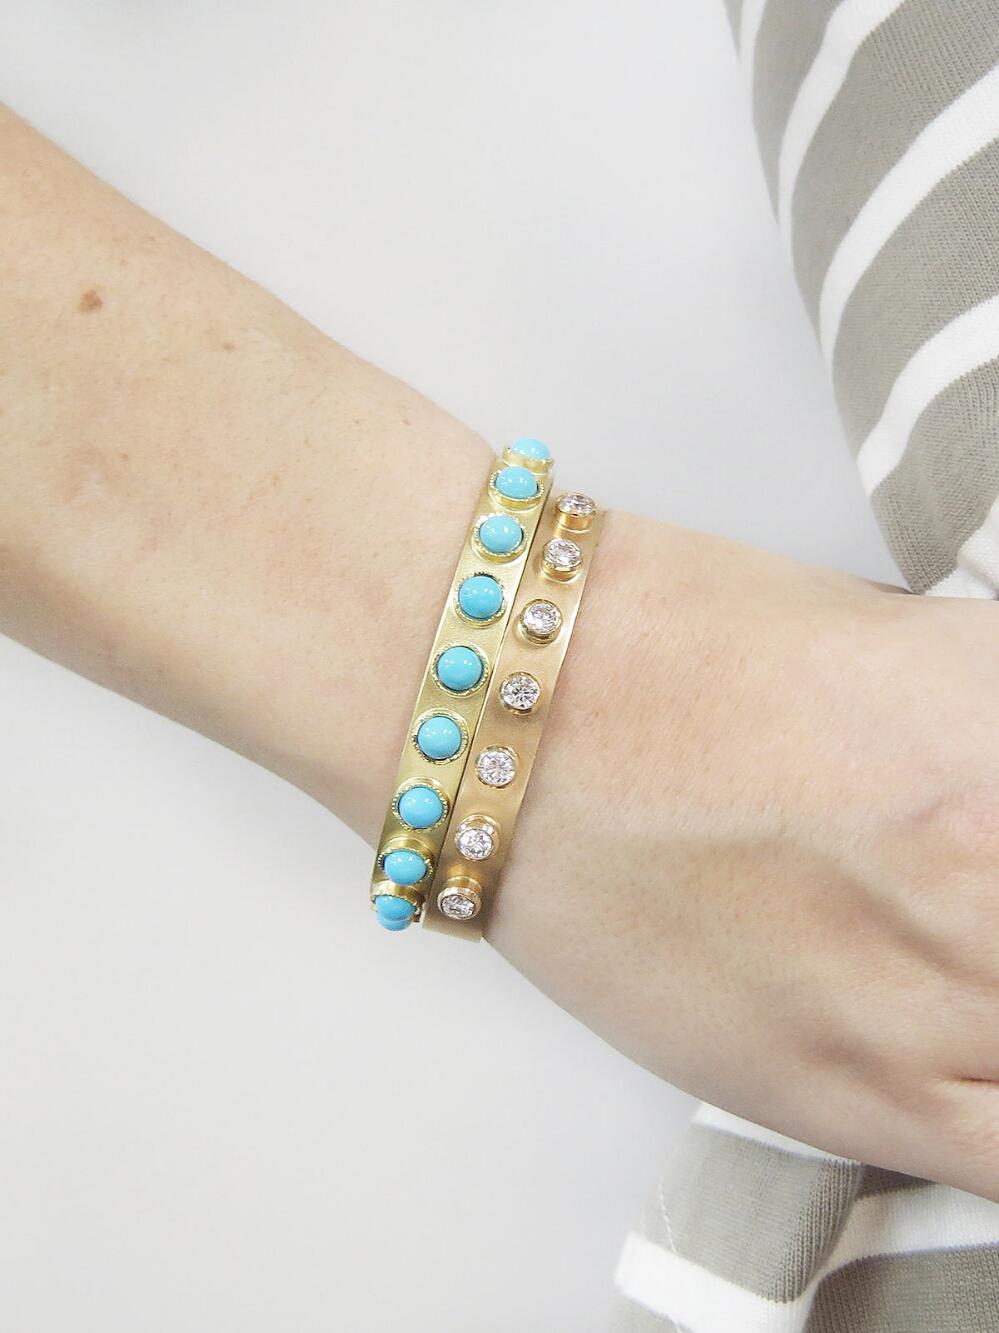 Irene Neuwirth Cabochon Turquoise Cuff Bracelet in Yellow Gold ...